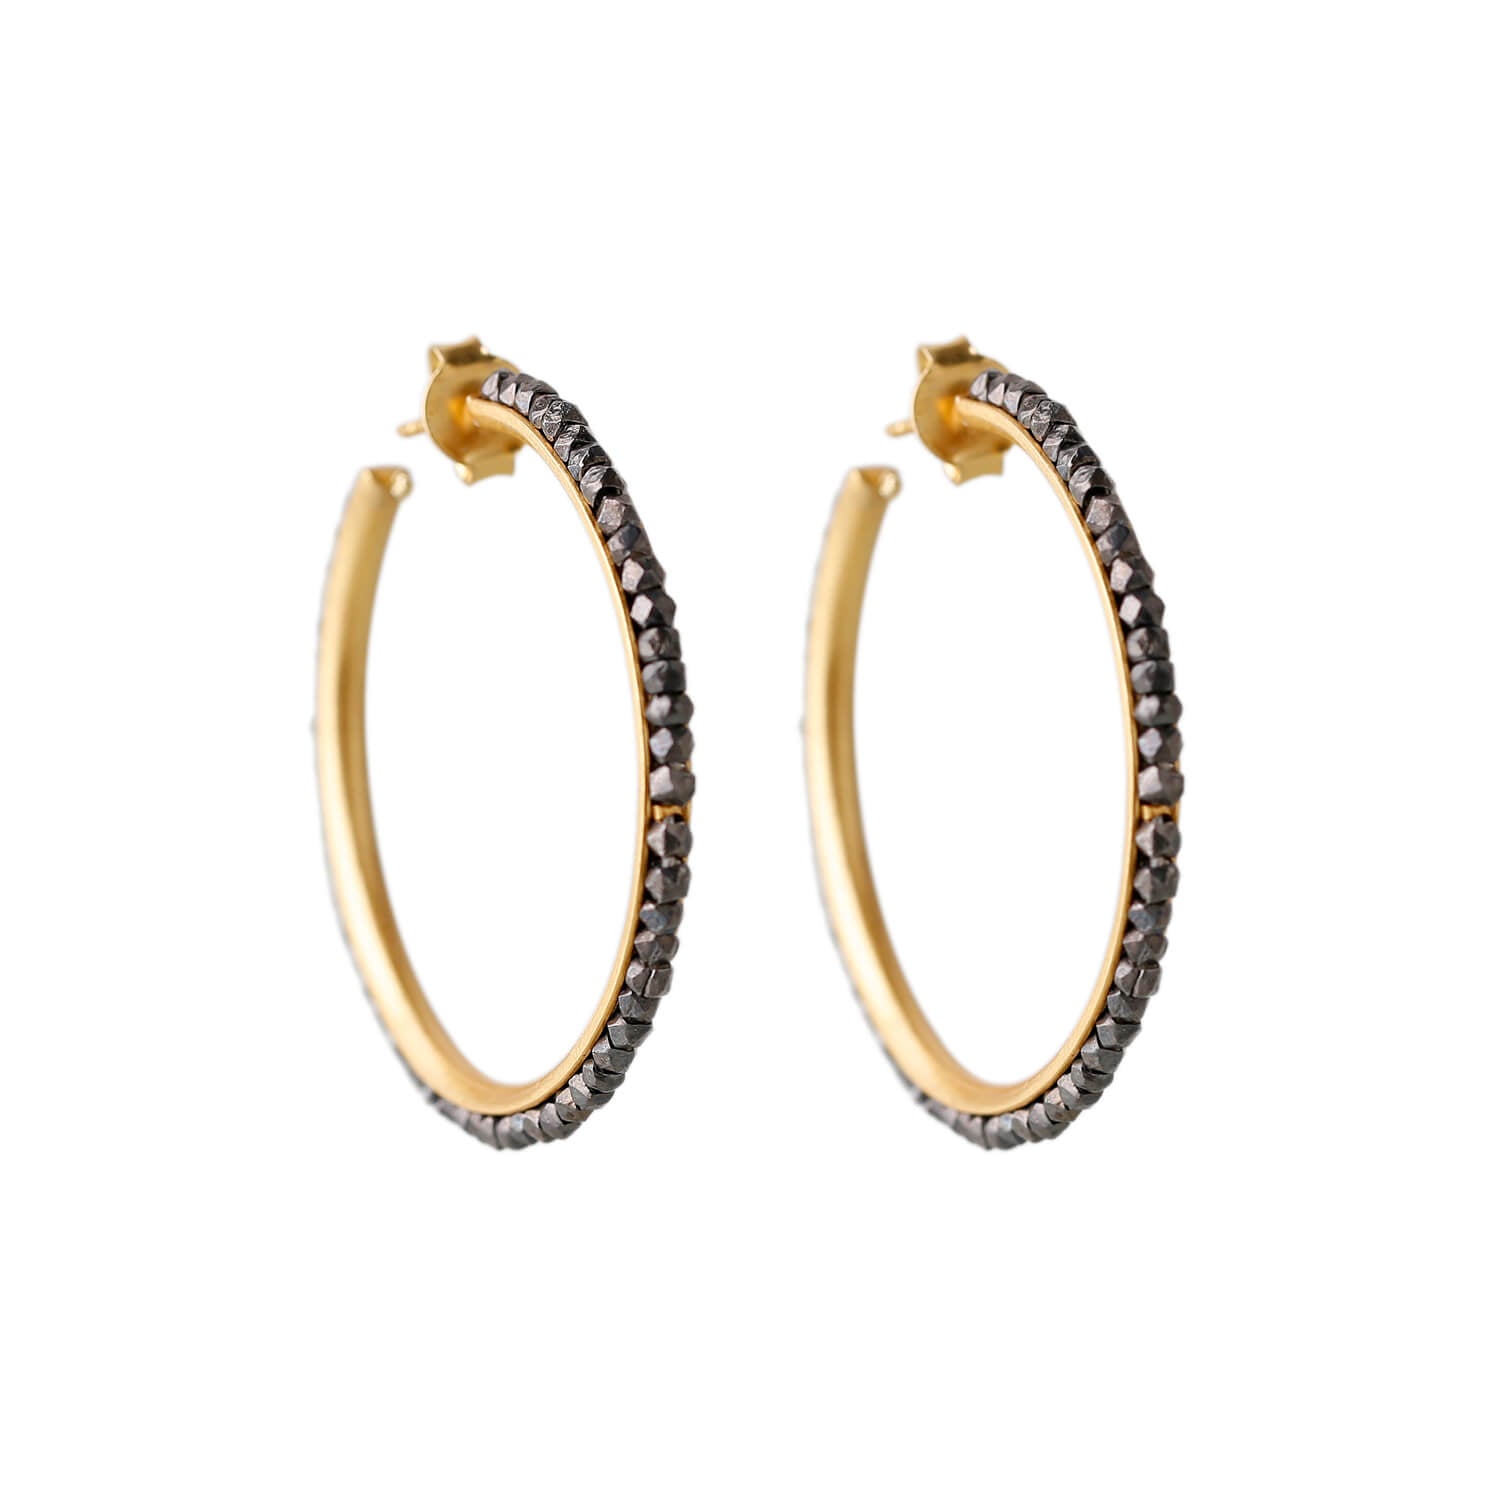 Shady Black and Gold Earrings